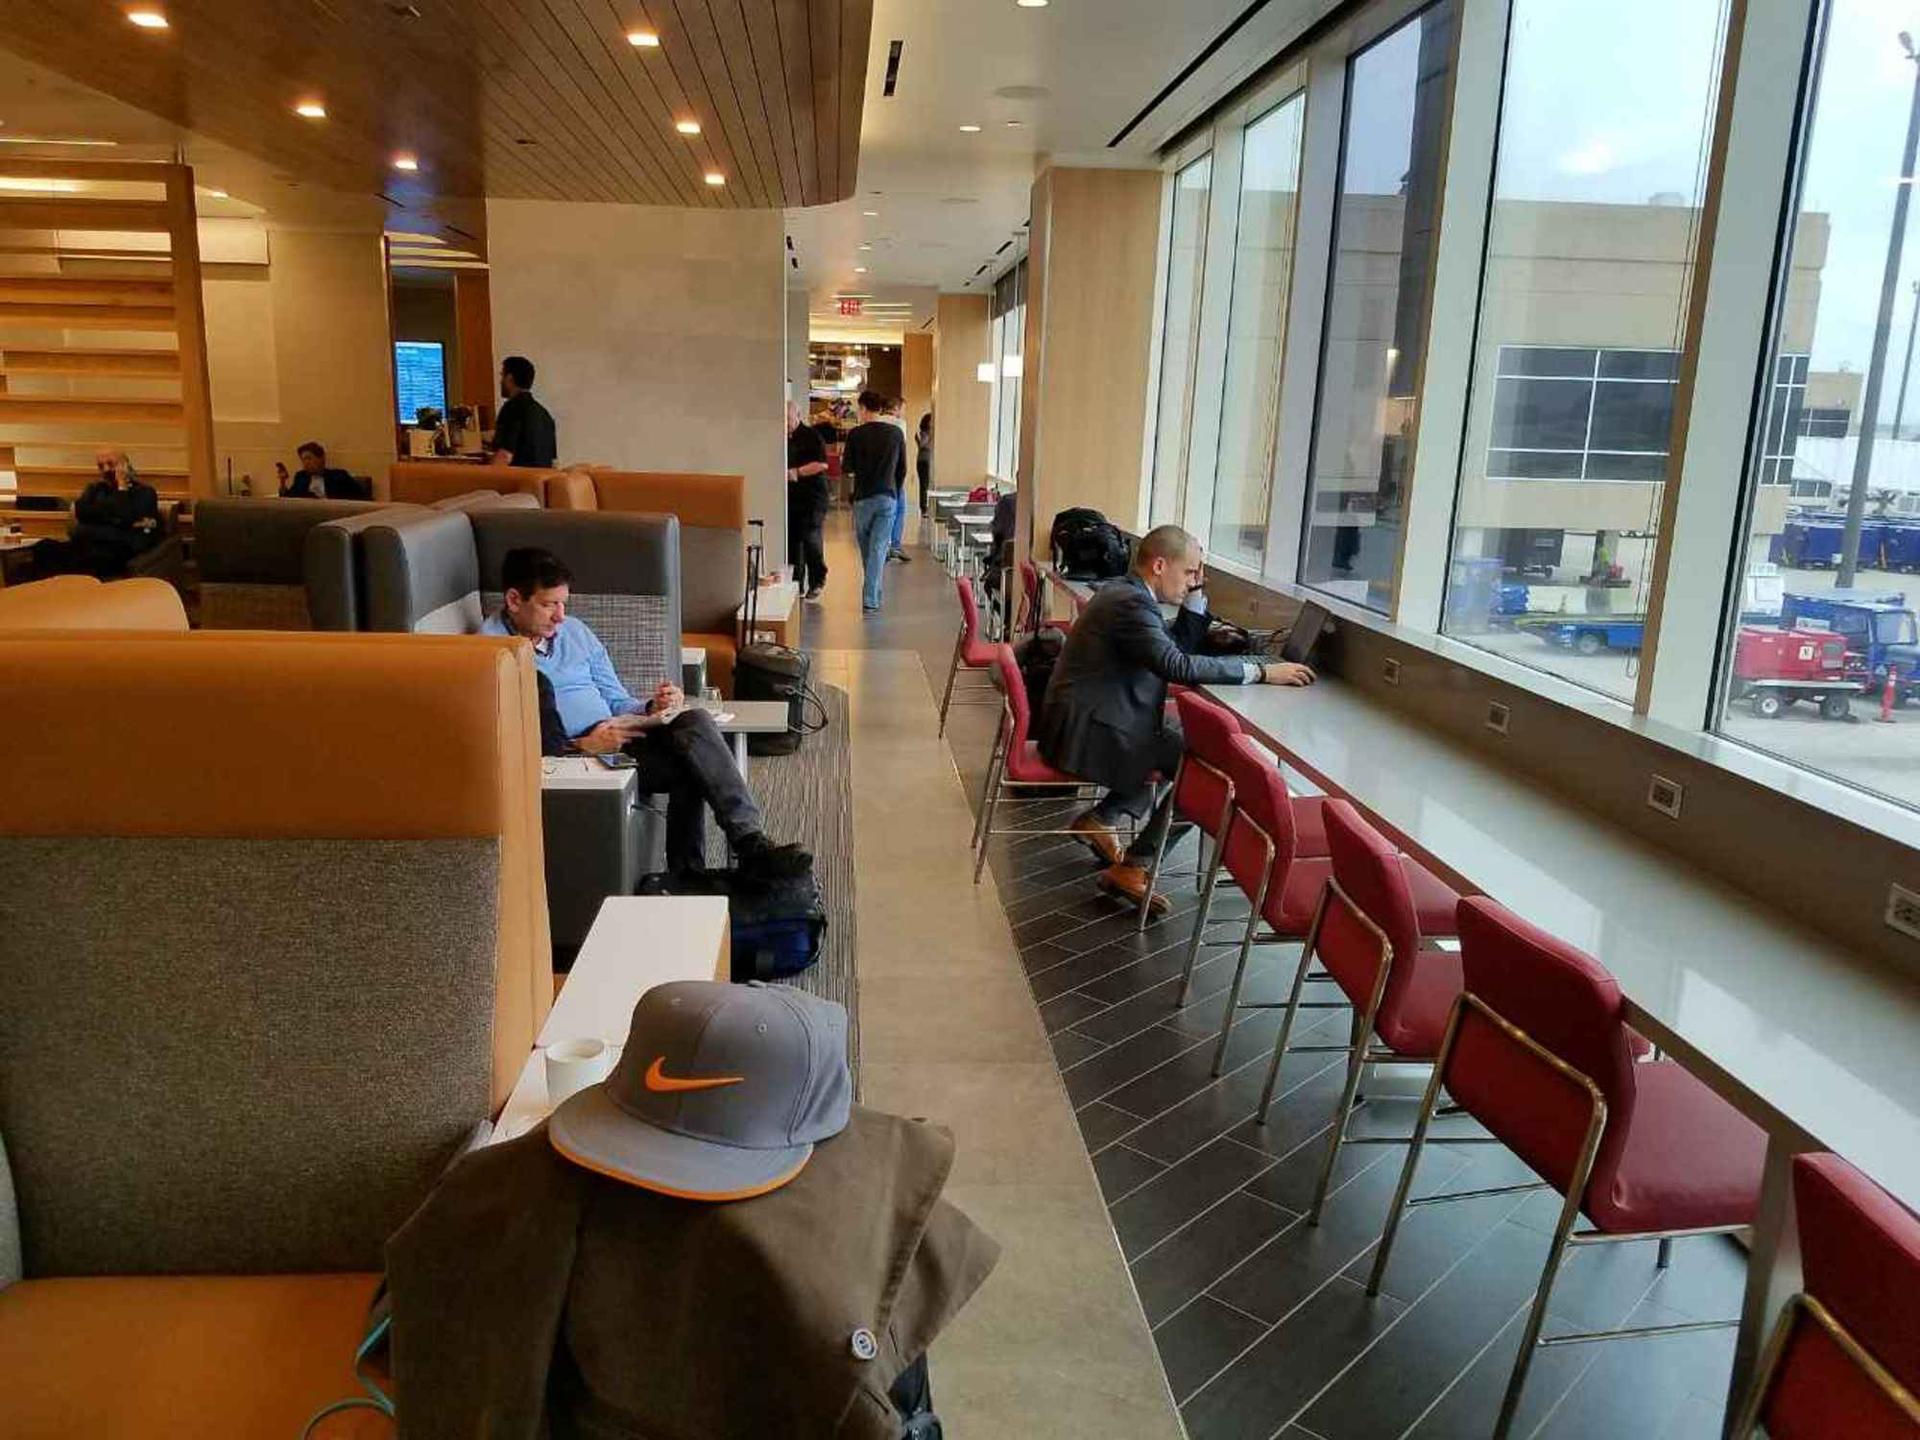 American Airlines Admirals Club image 1 of 13